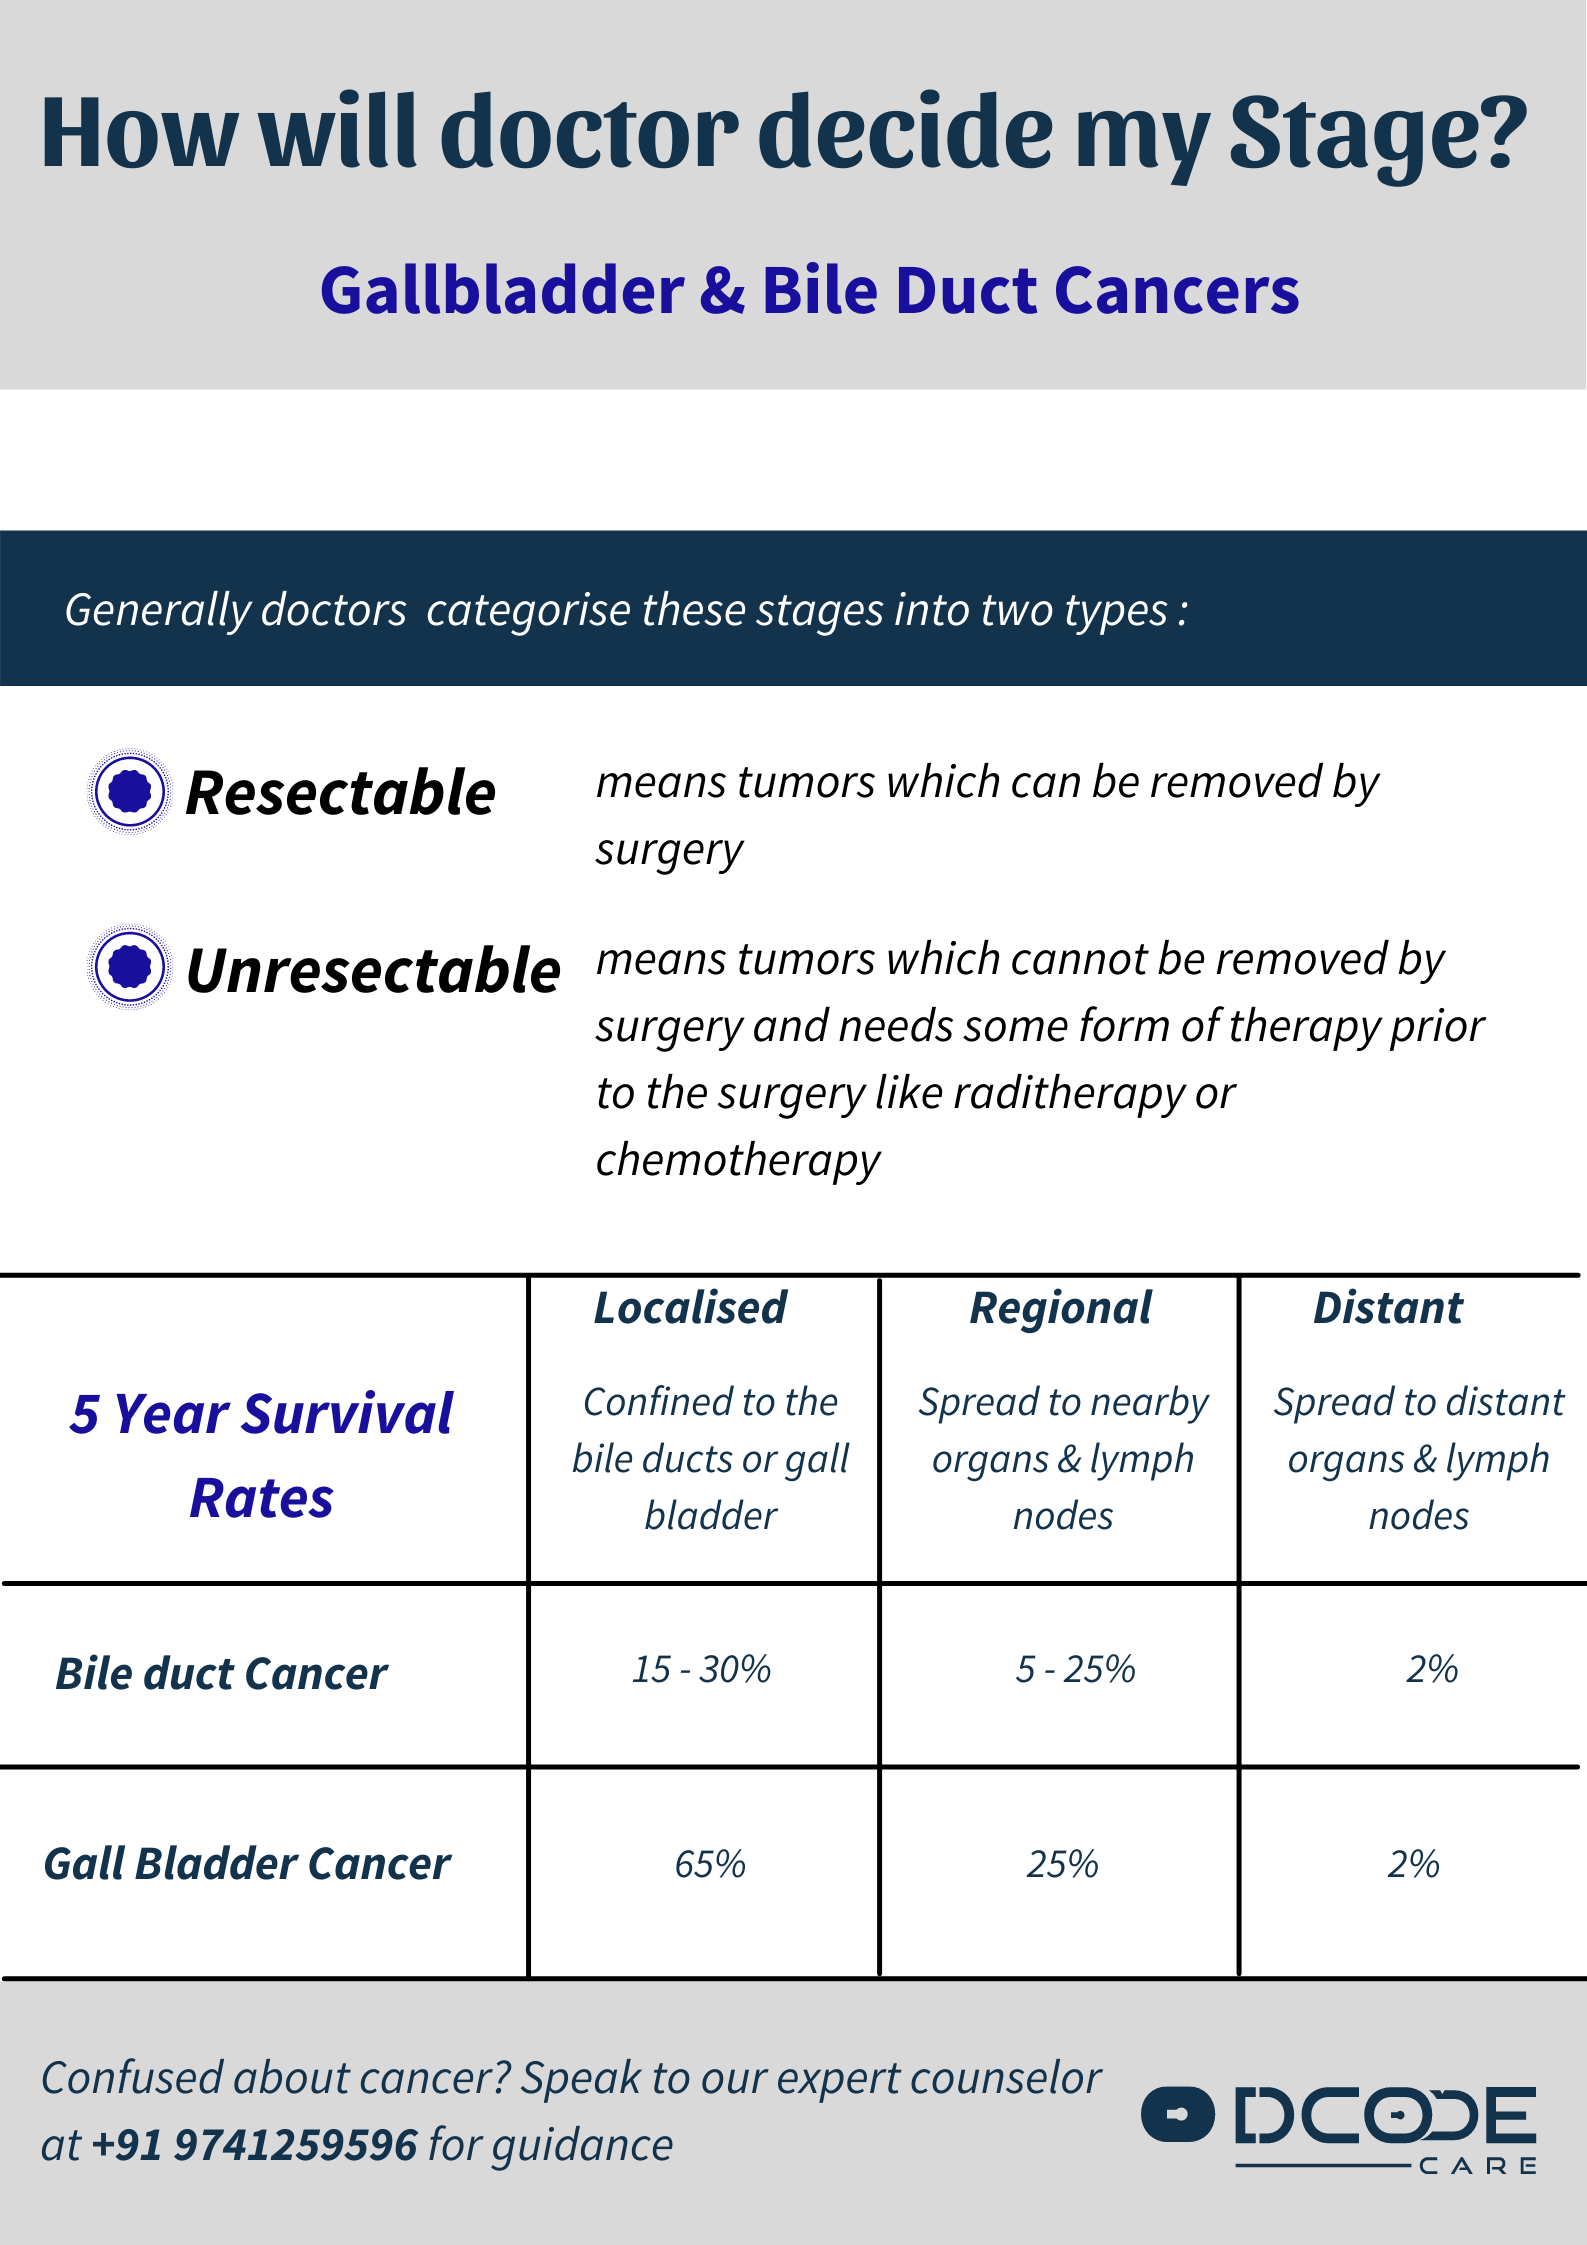 How will doctor decide my stage? Gallbladder Cancers